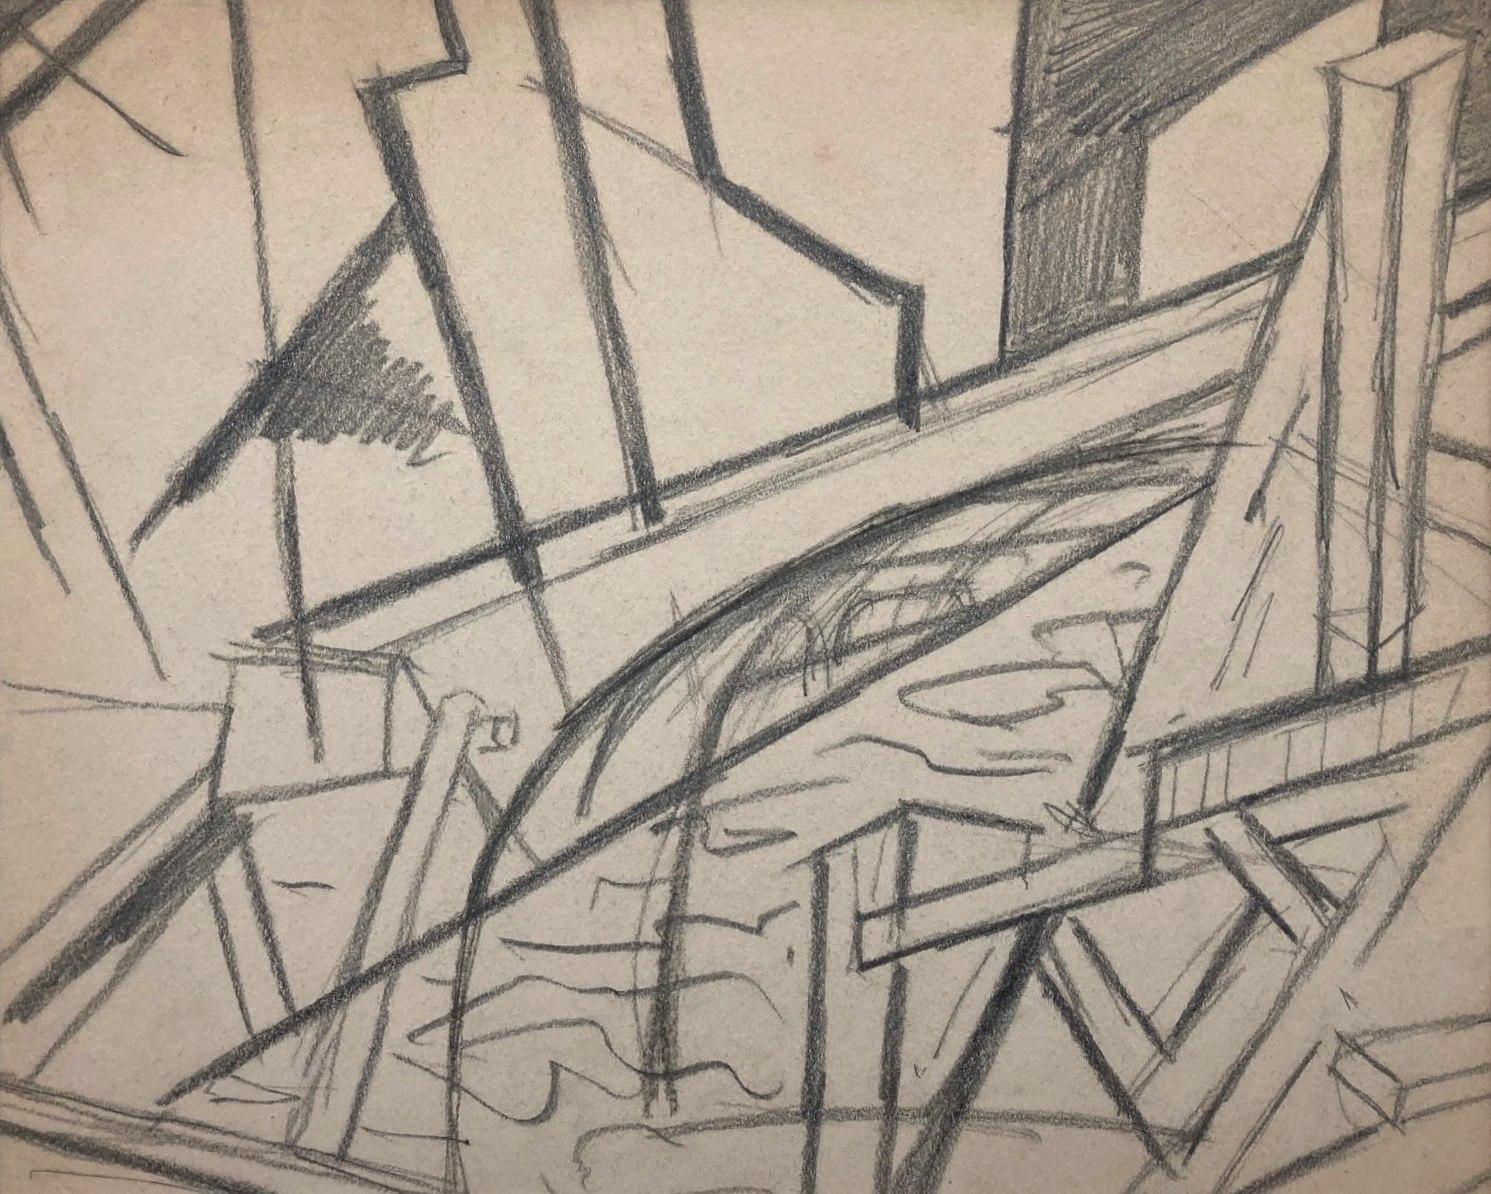 A graphite on paper, untitled mural study, Cubist city scene by WPA-era artist Rudolph Weisenborn, ca. 1940.  Archivally matted to 16" x 18".  Provenance:  Estate of the artist.

Rudolph Weisenborn was born in Strassburg, Germany in 1881, but was